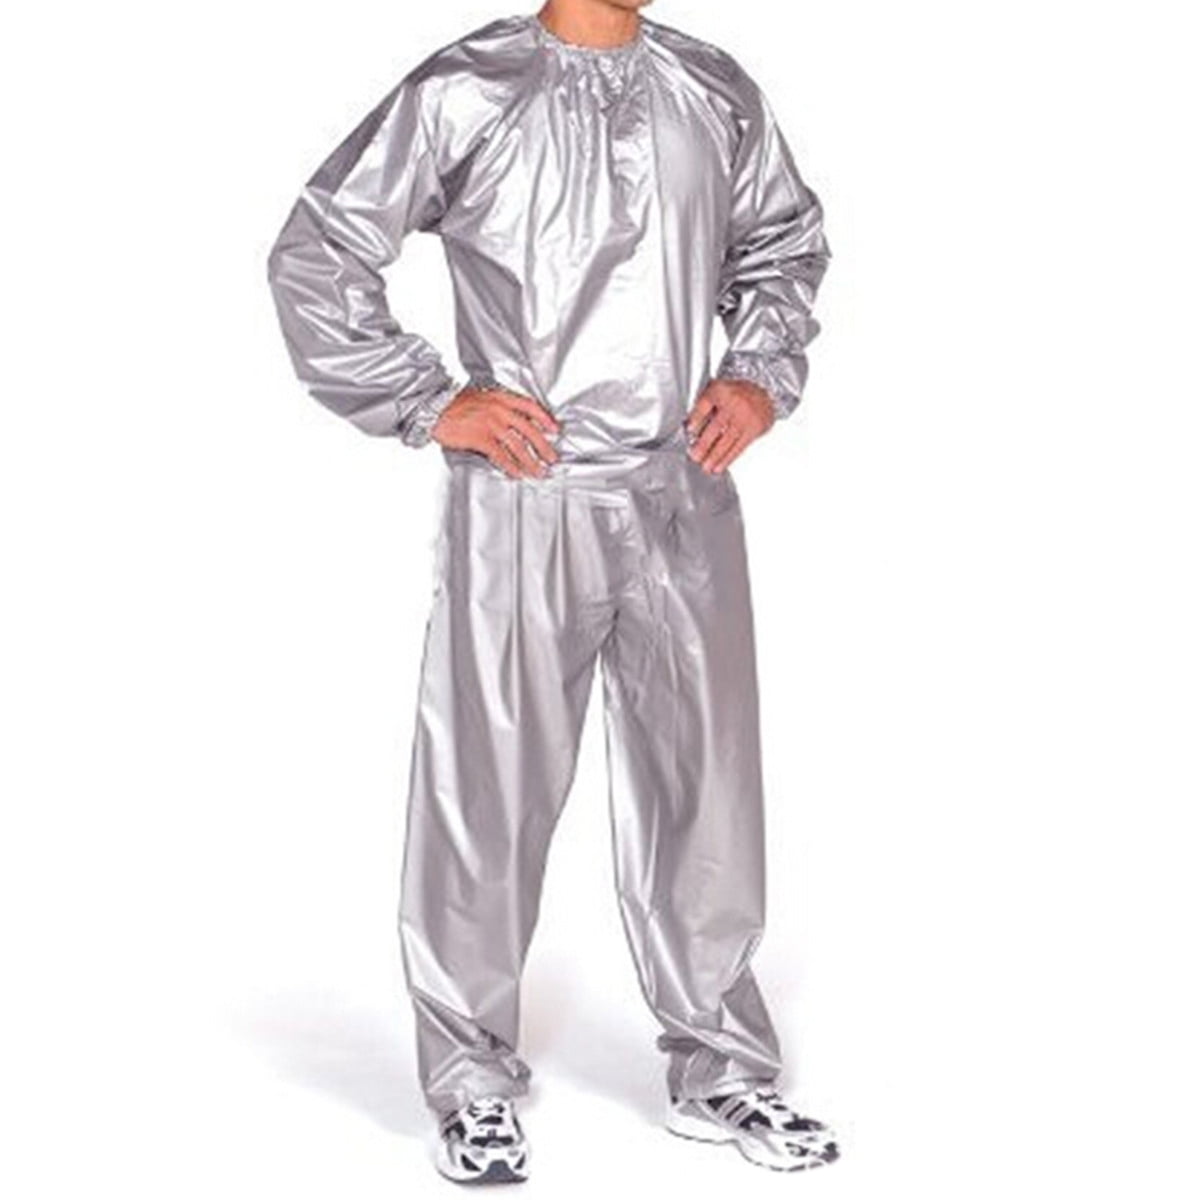 Heavy Duty Sauna Sweat Suit Track Suit Weight Loss Slimming Training Gym Fat 